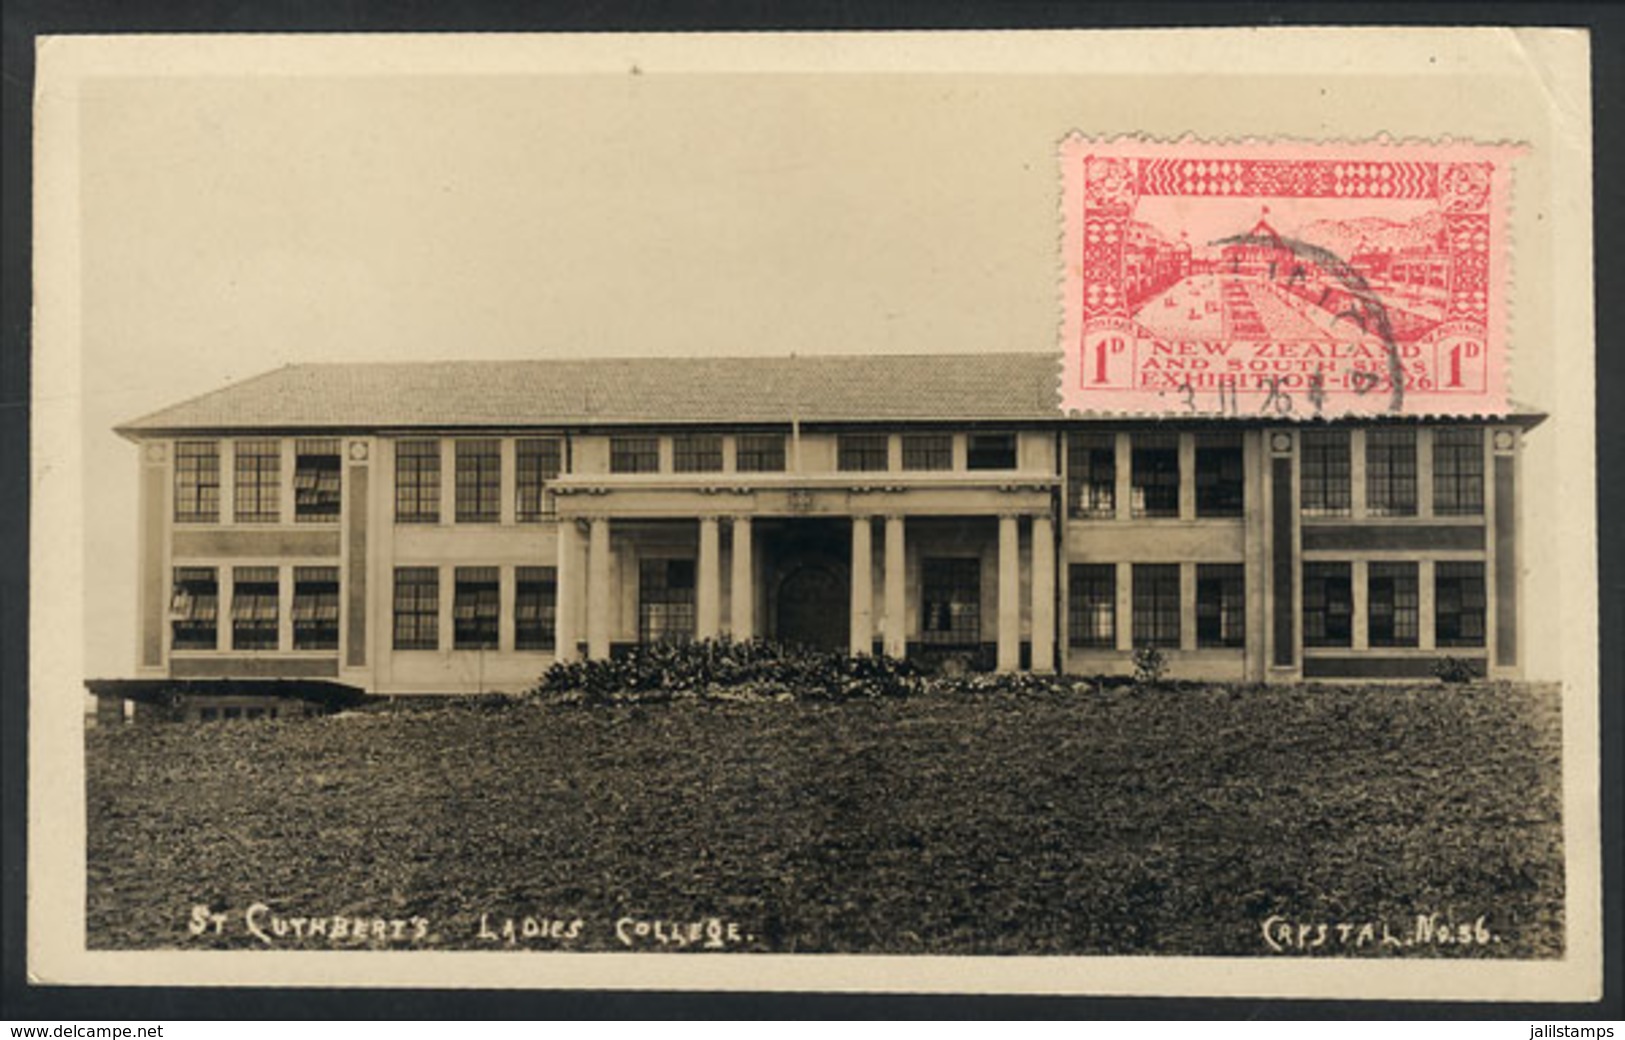 1345 NEW ZEALAND: St. Cuthbert's Ladies College, Circa 1926, VF Quality - New Zealand